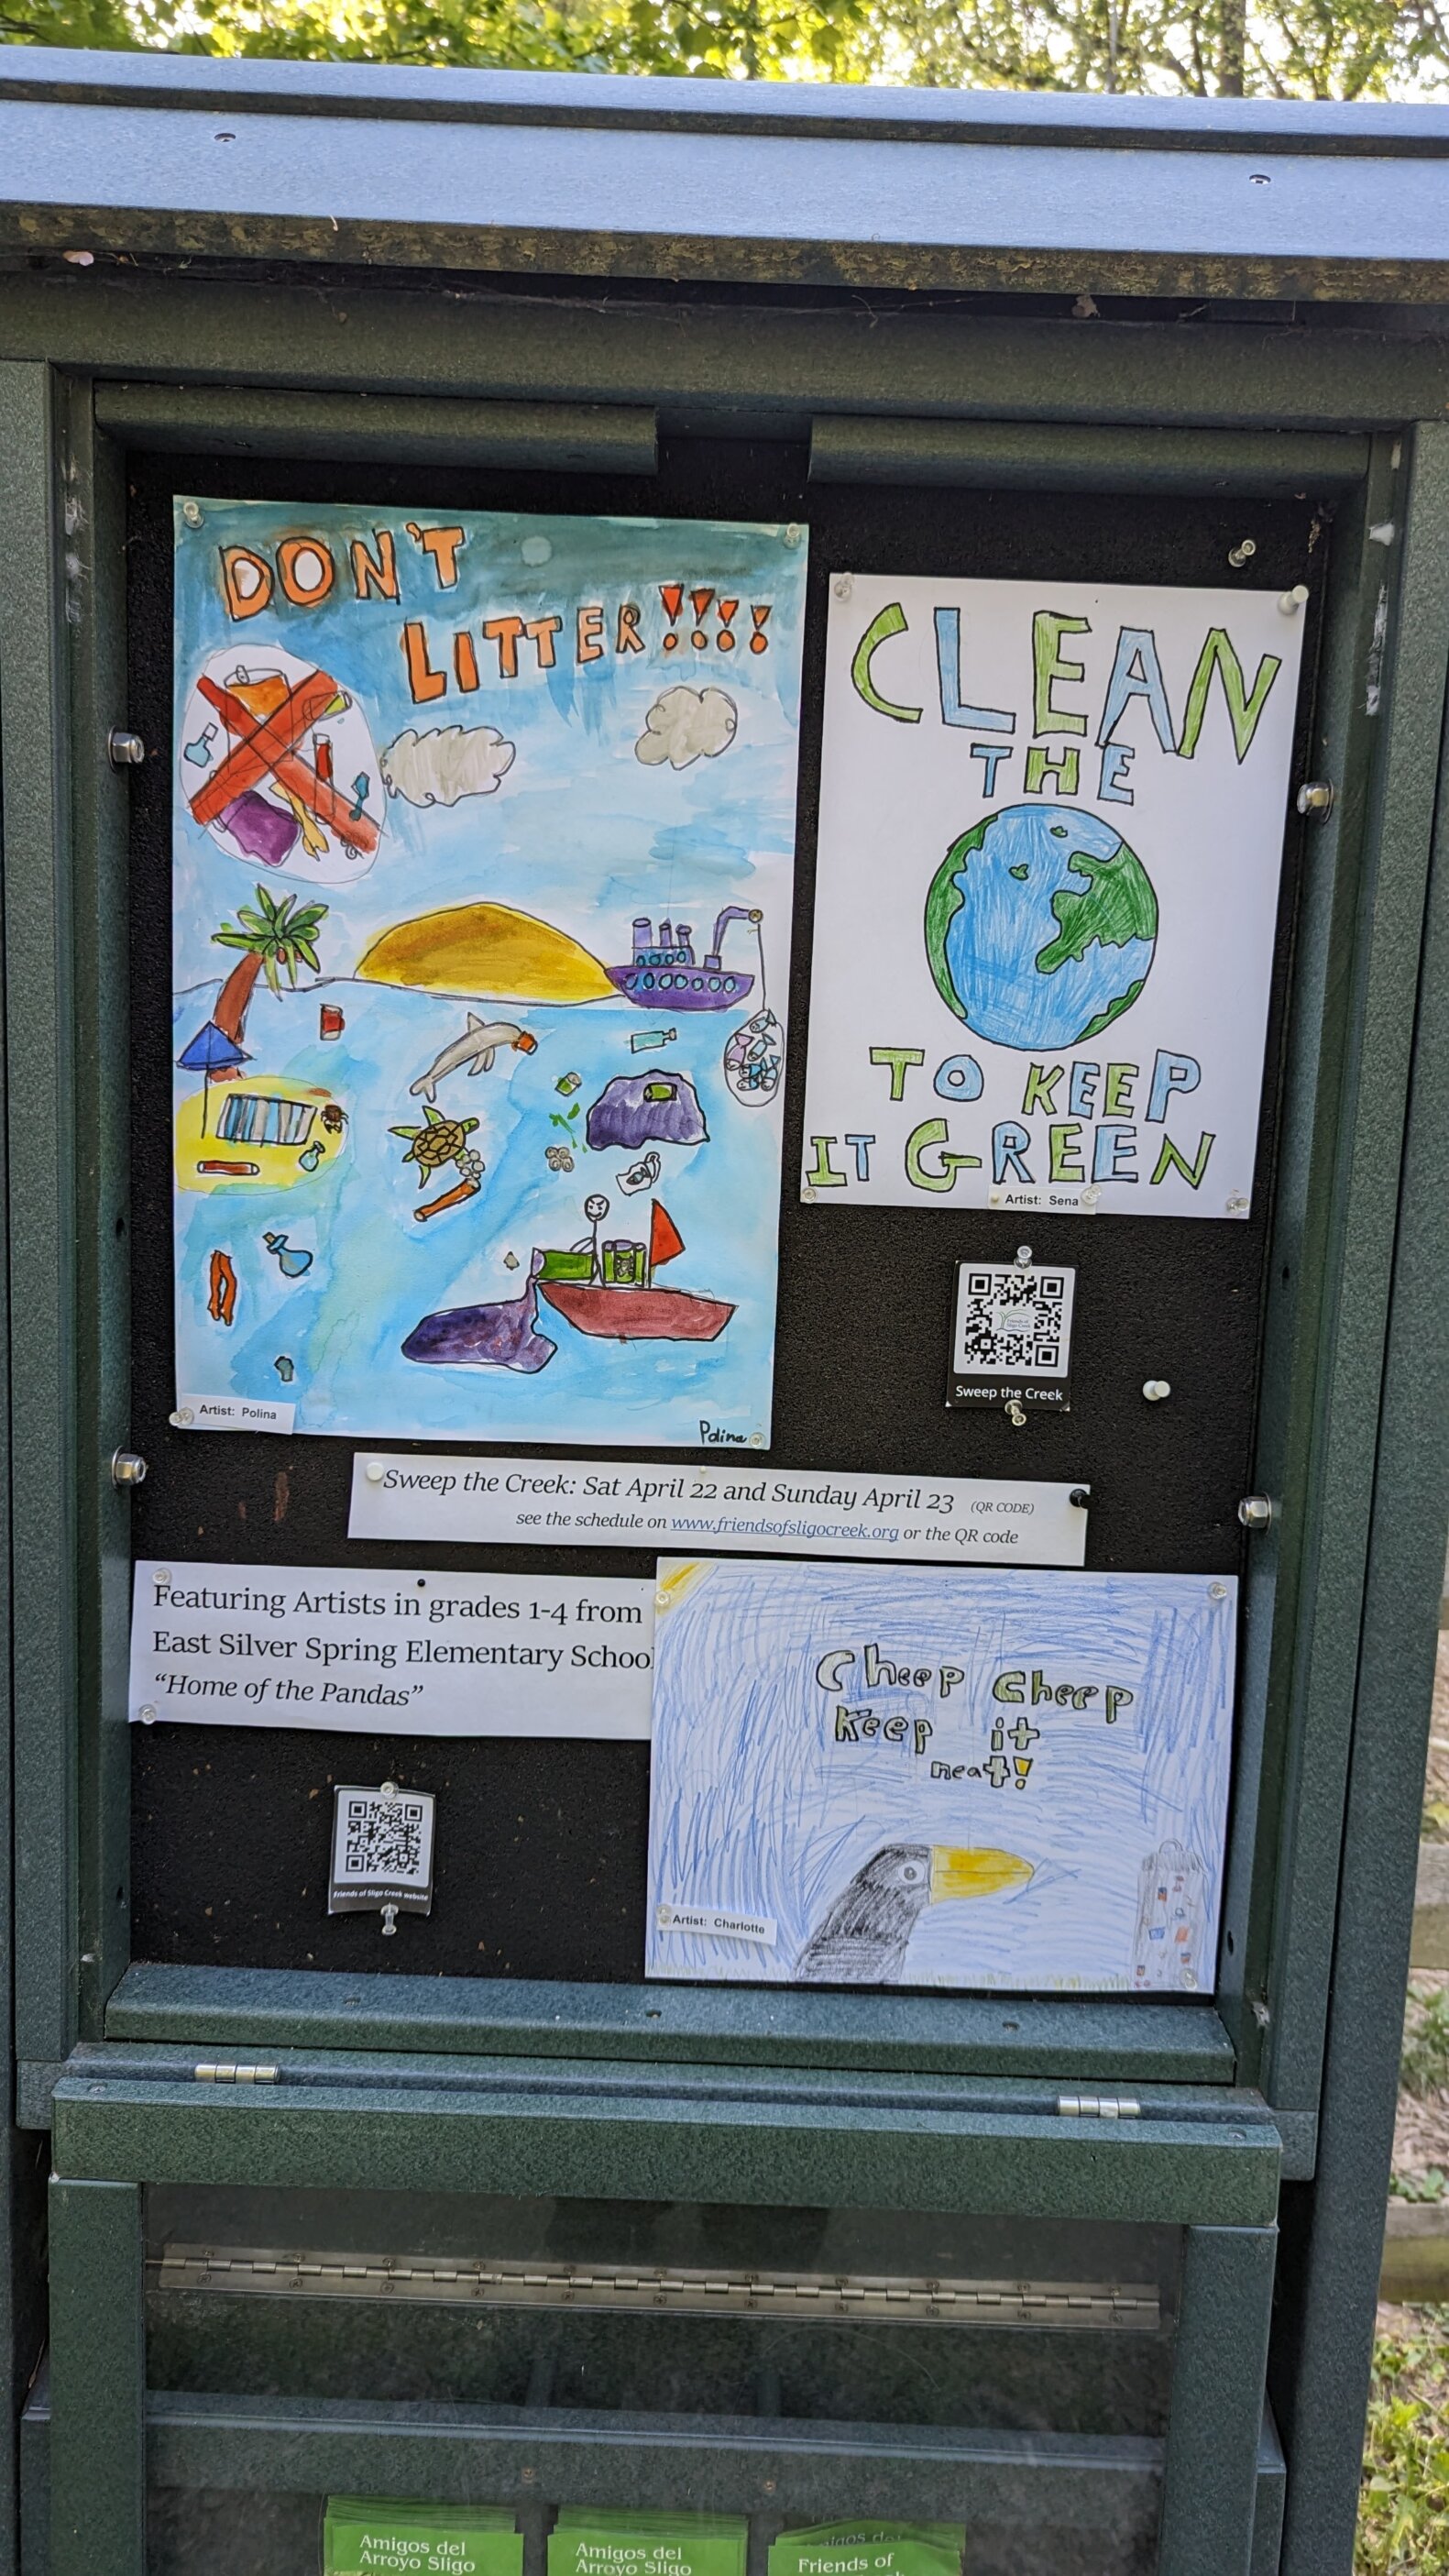 Section 2 Kiosk exhibiting students' artwork about Sweeping the Creek of litter.